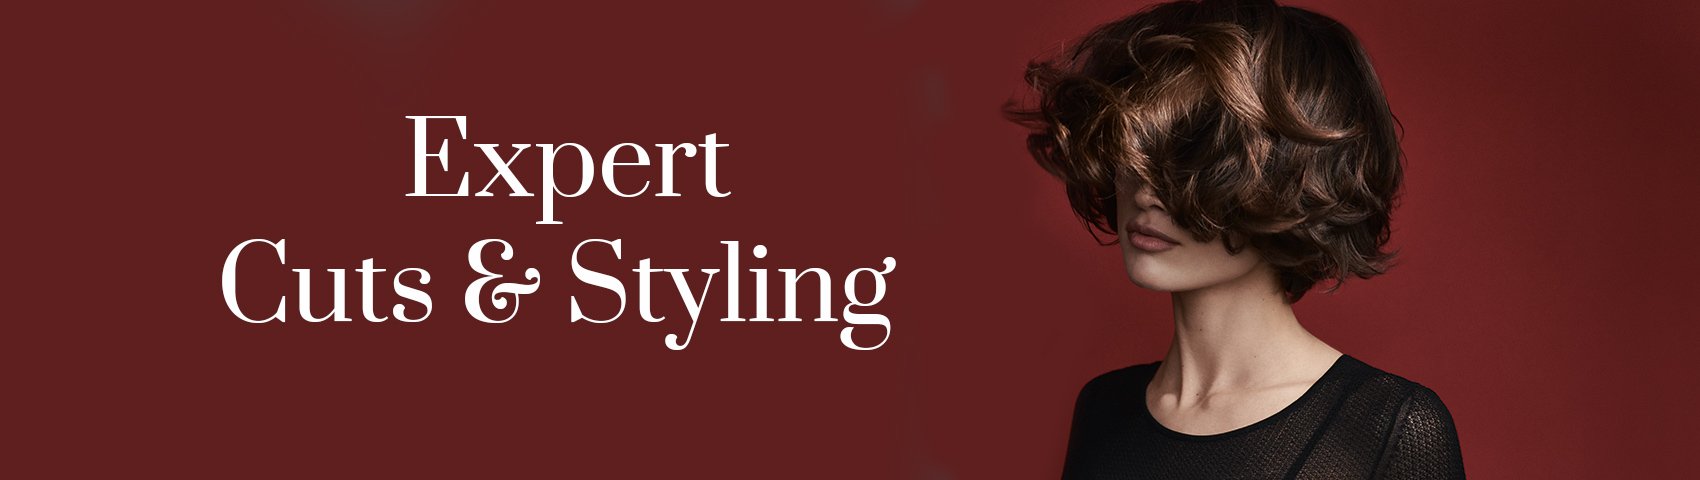 Expert Cuts Styling BANNER